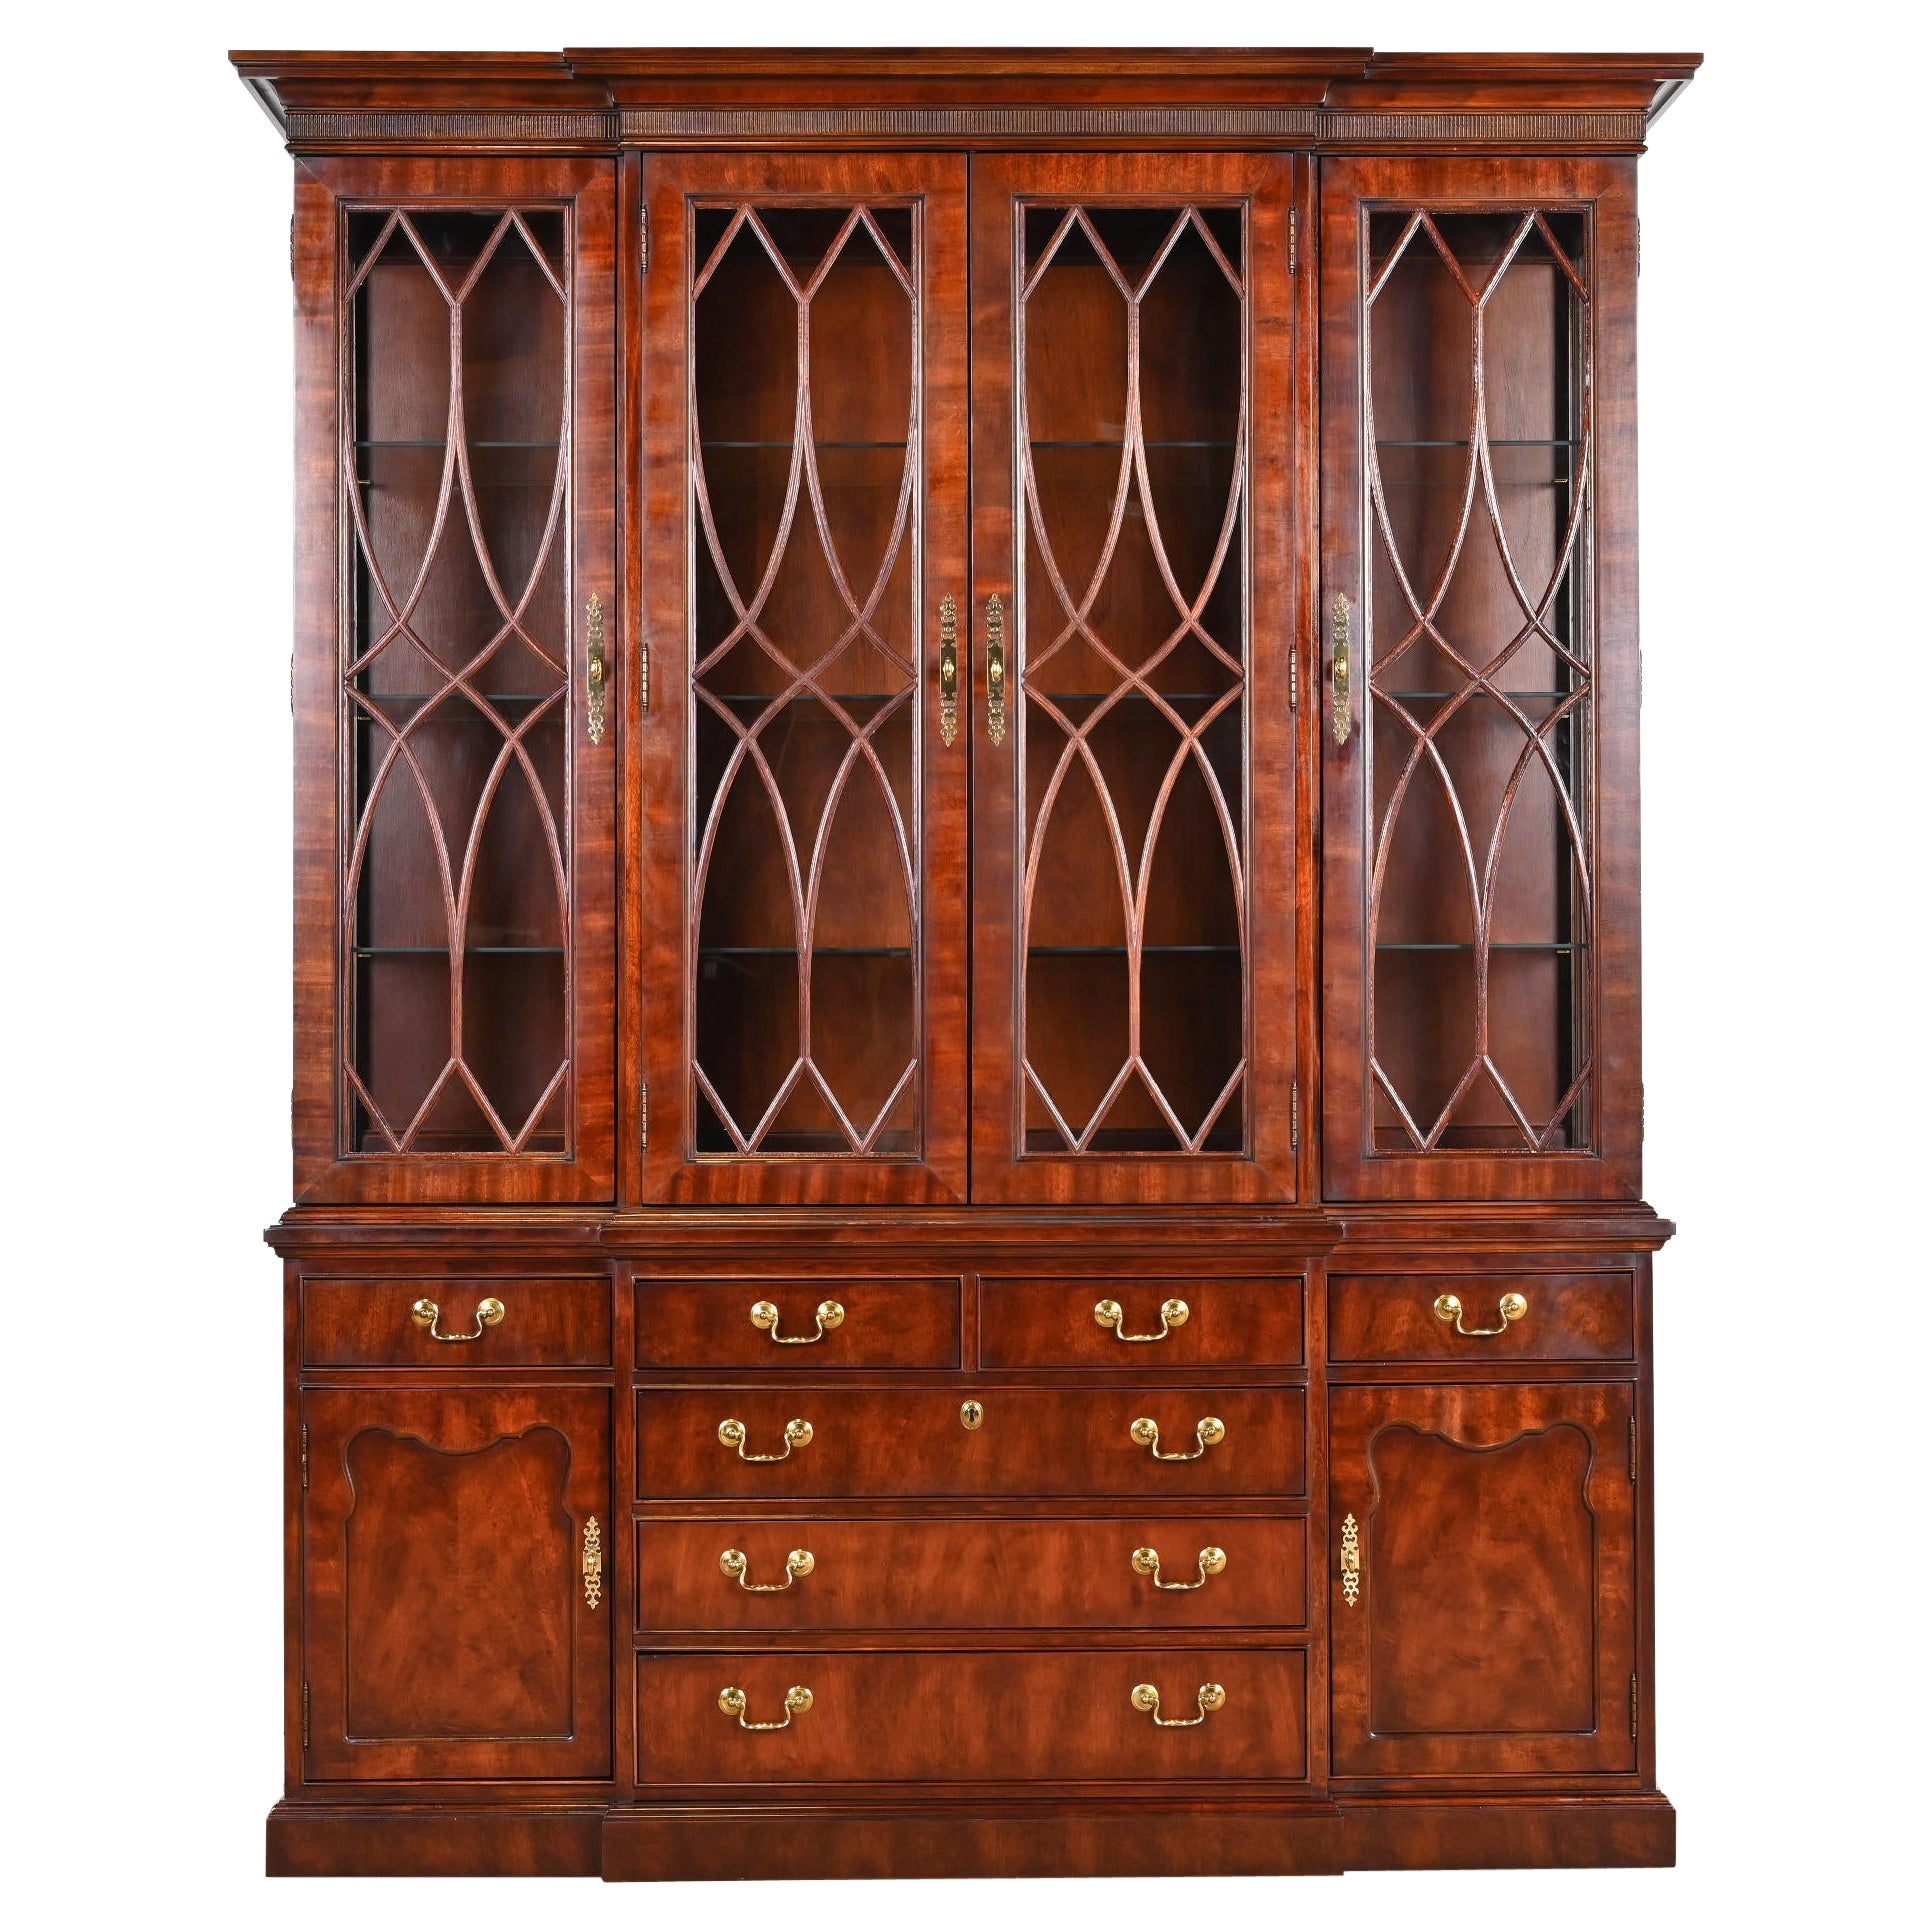 Georgian Carved Mahogany Lighted Breakfront Bookcase Cabinet by Thomasville